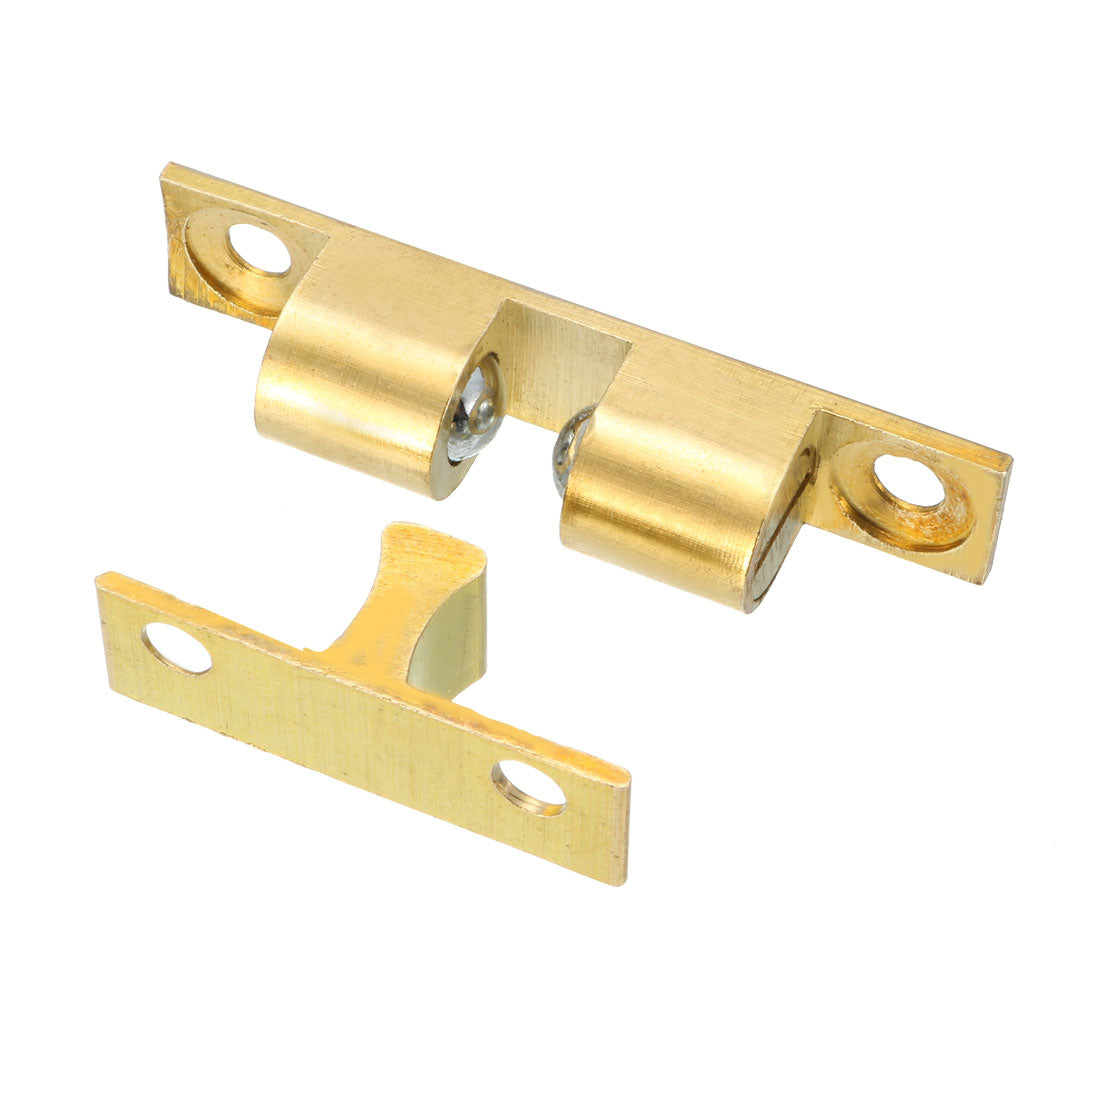 uxcell Uxcell 2pcs Cabinet Door Closet Brass Double Ball Catch Tension Latch 50mm Length Gold Tone